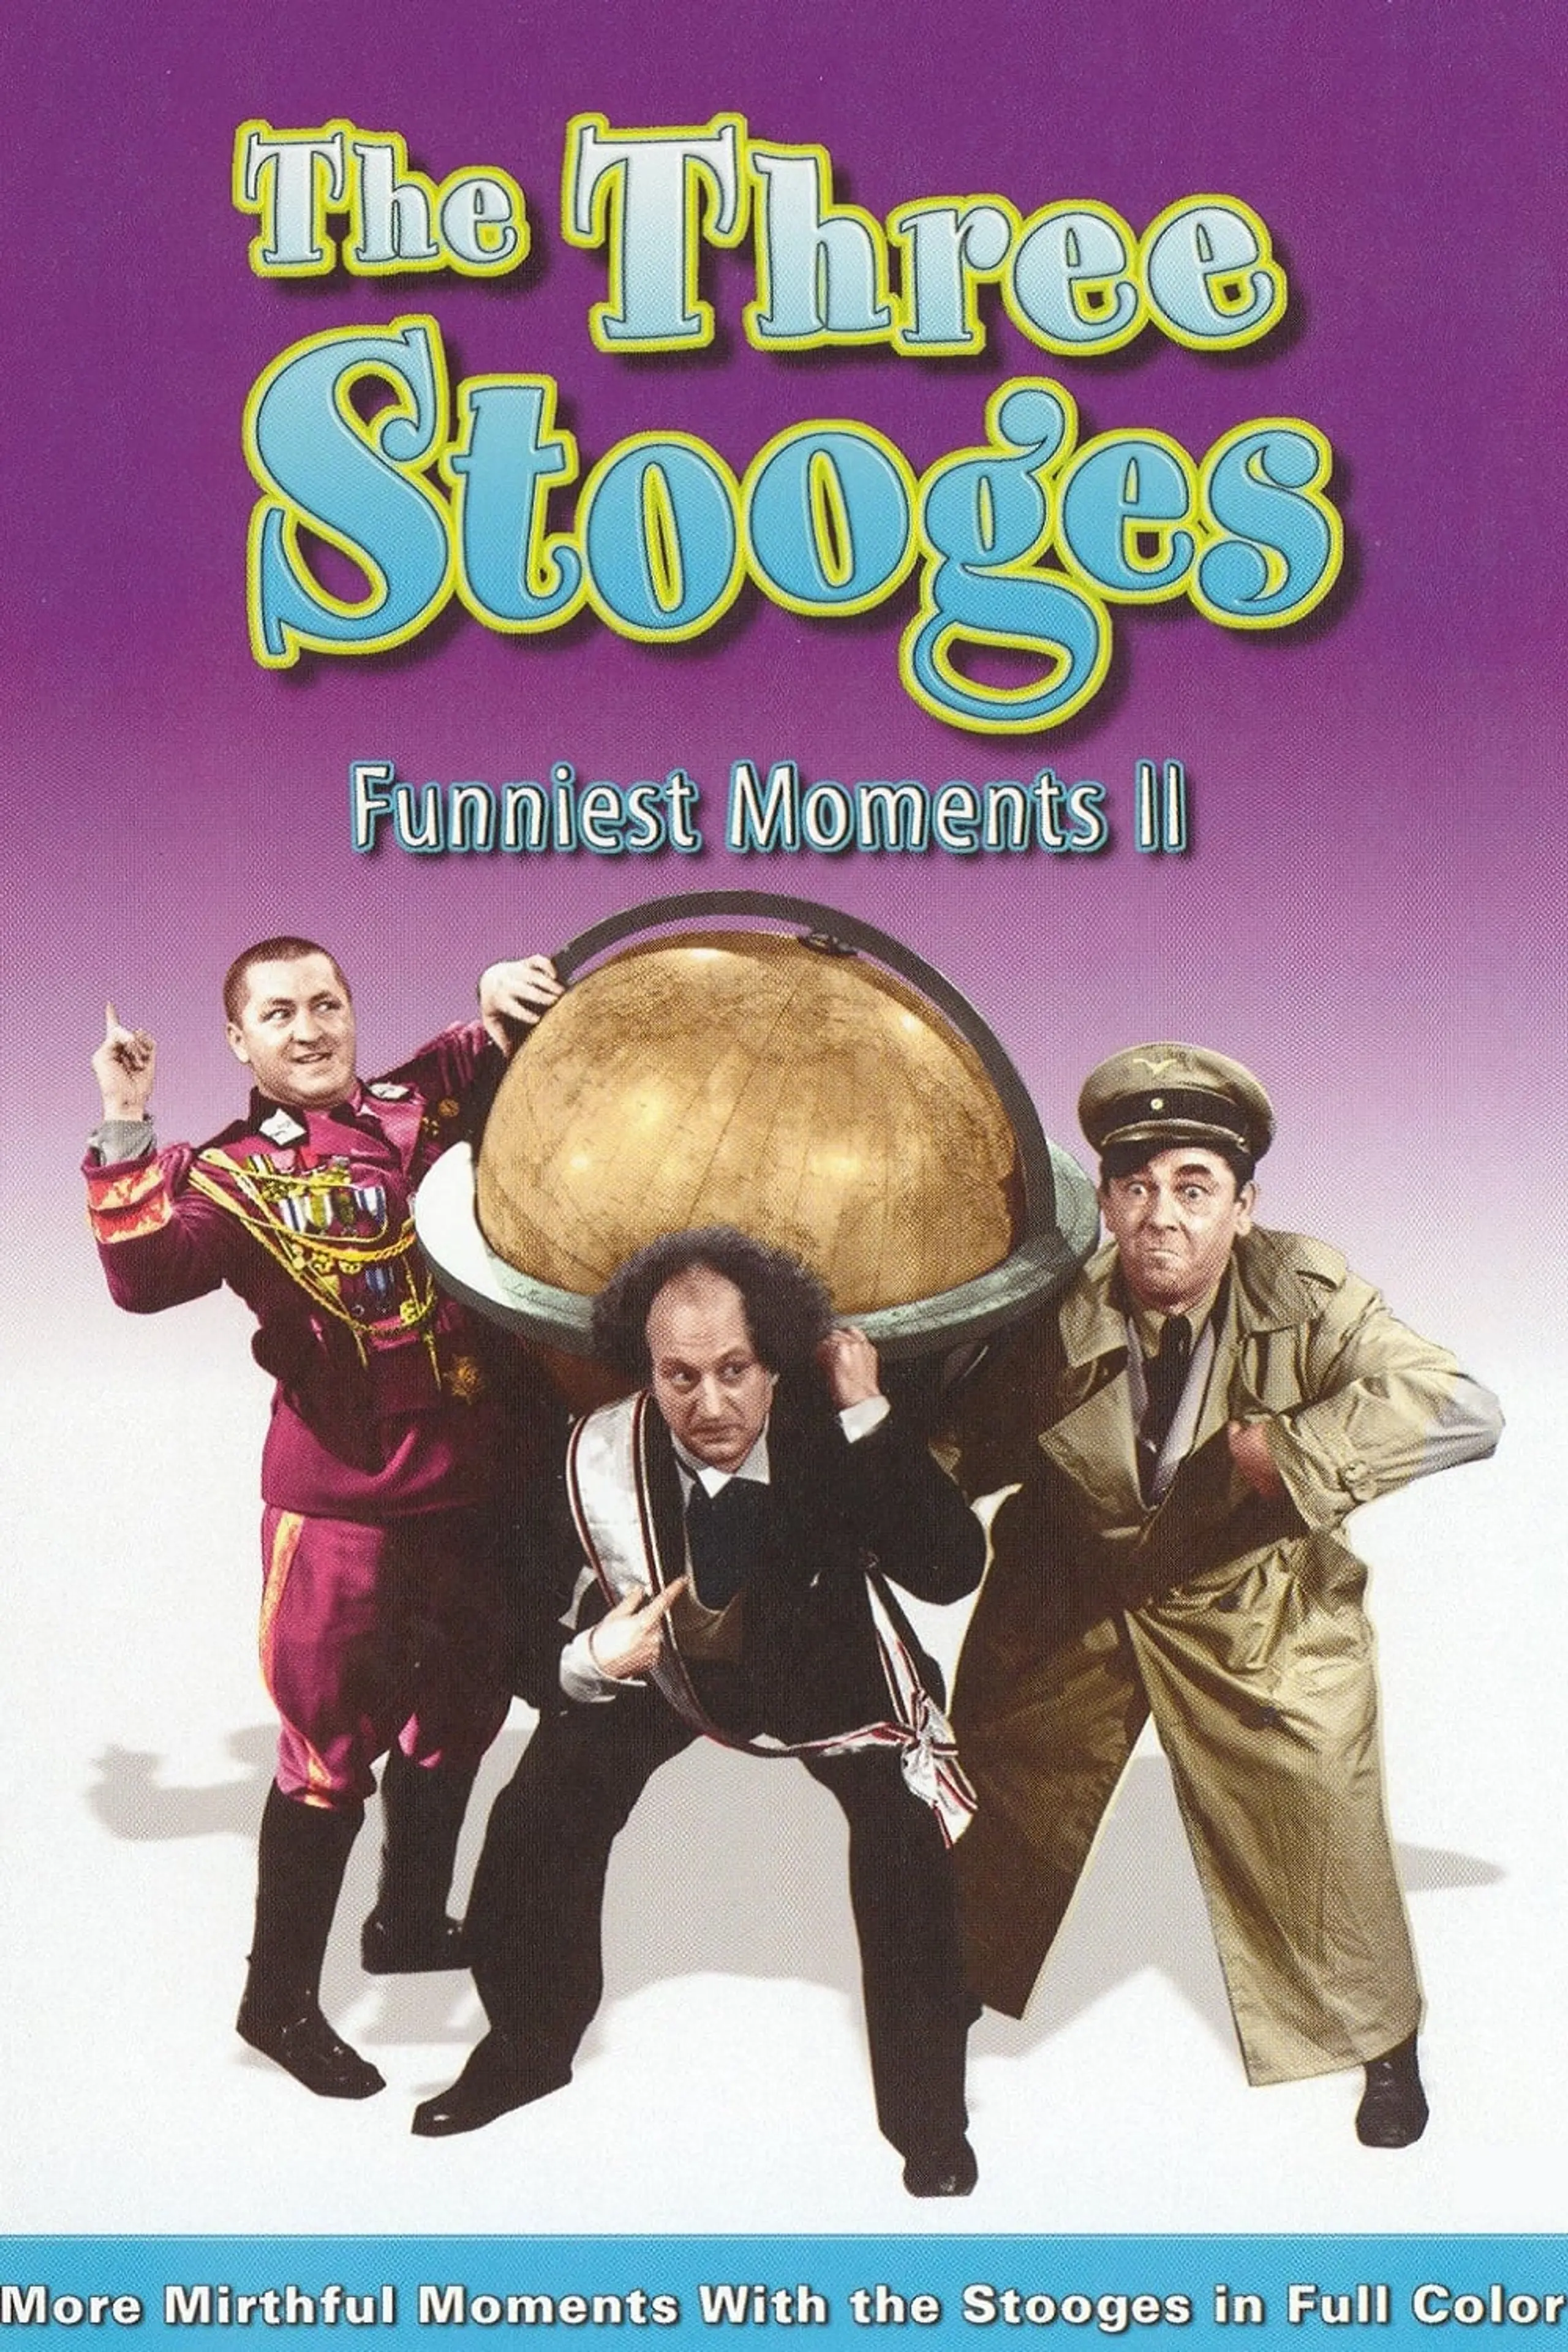 The Three Stooges Funniest Moments - Volume II